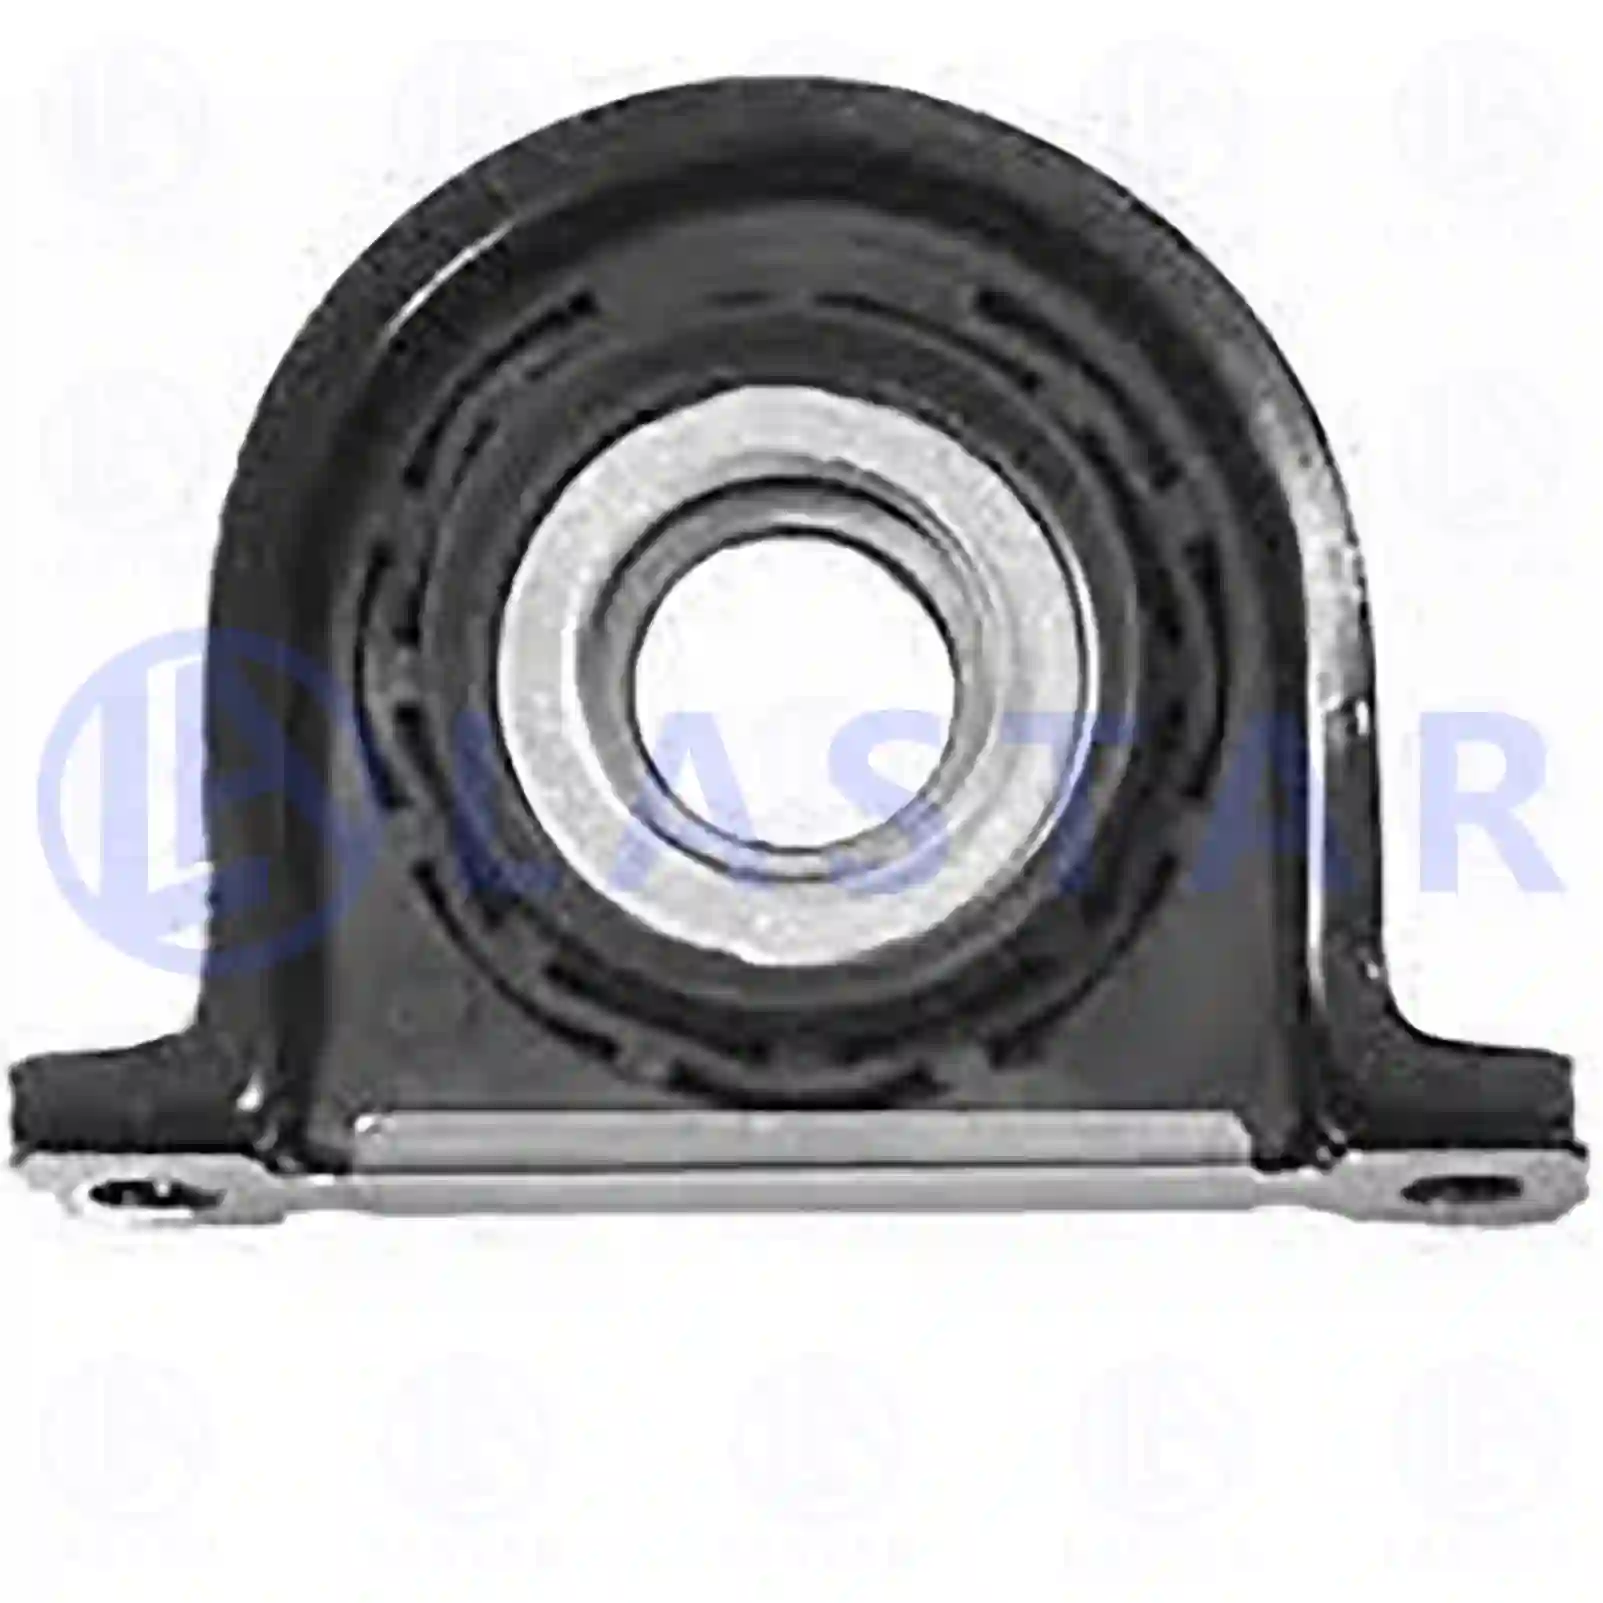 Support Bearing Center bearing, la no: 77734354 ,  oem no:08194600, 42536524, 8194600, ZG02505-0008 Lastar Spare Part | Truck Spare Parts, Auotomotive Spare Parts